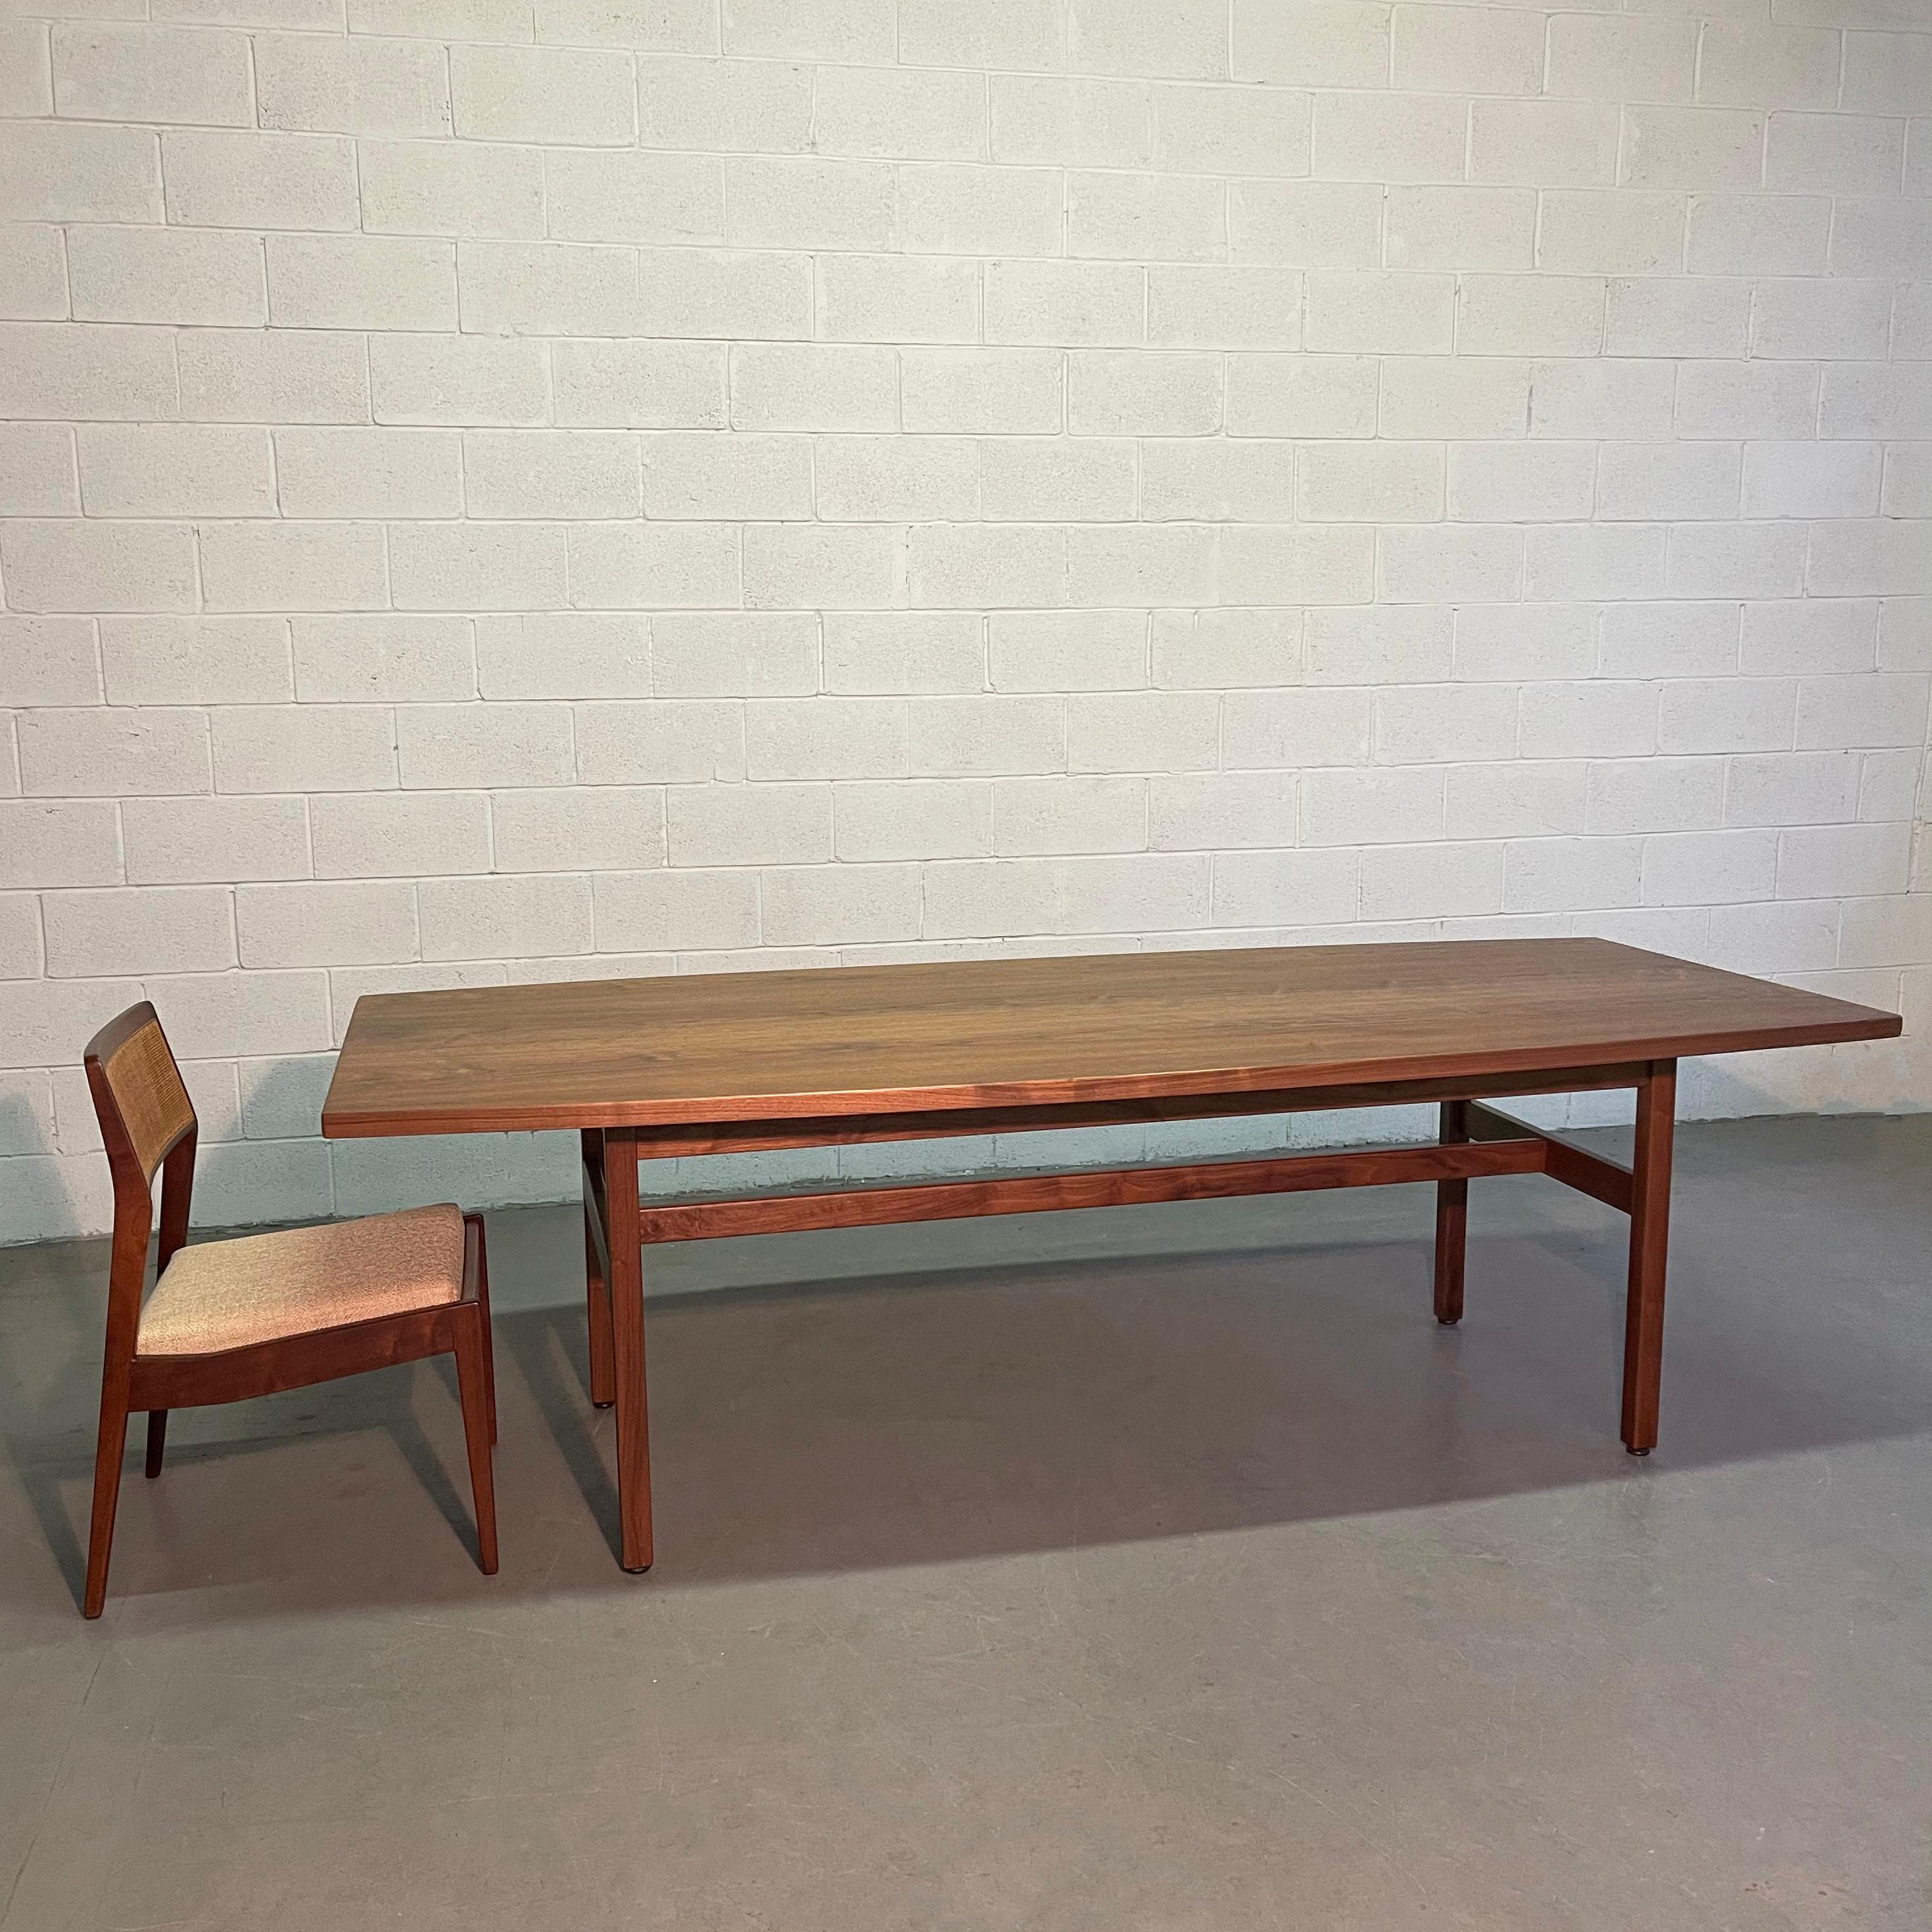 Large, 8 ft, Mid-Century Modern, walnut, conference or dining table by Jens Risom features a curved, surf board top that tapers to 36 inches at each end with trestle base.